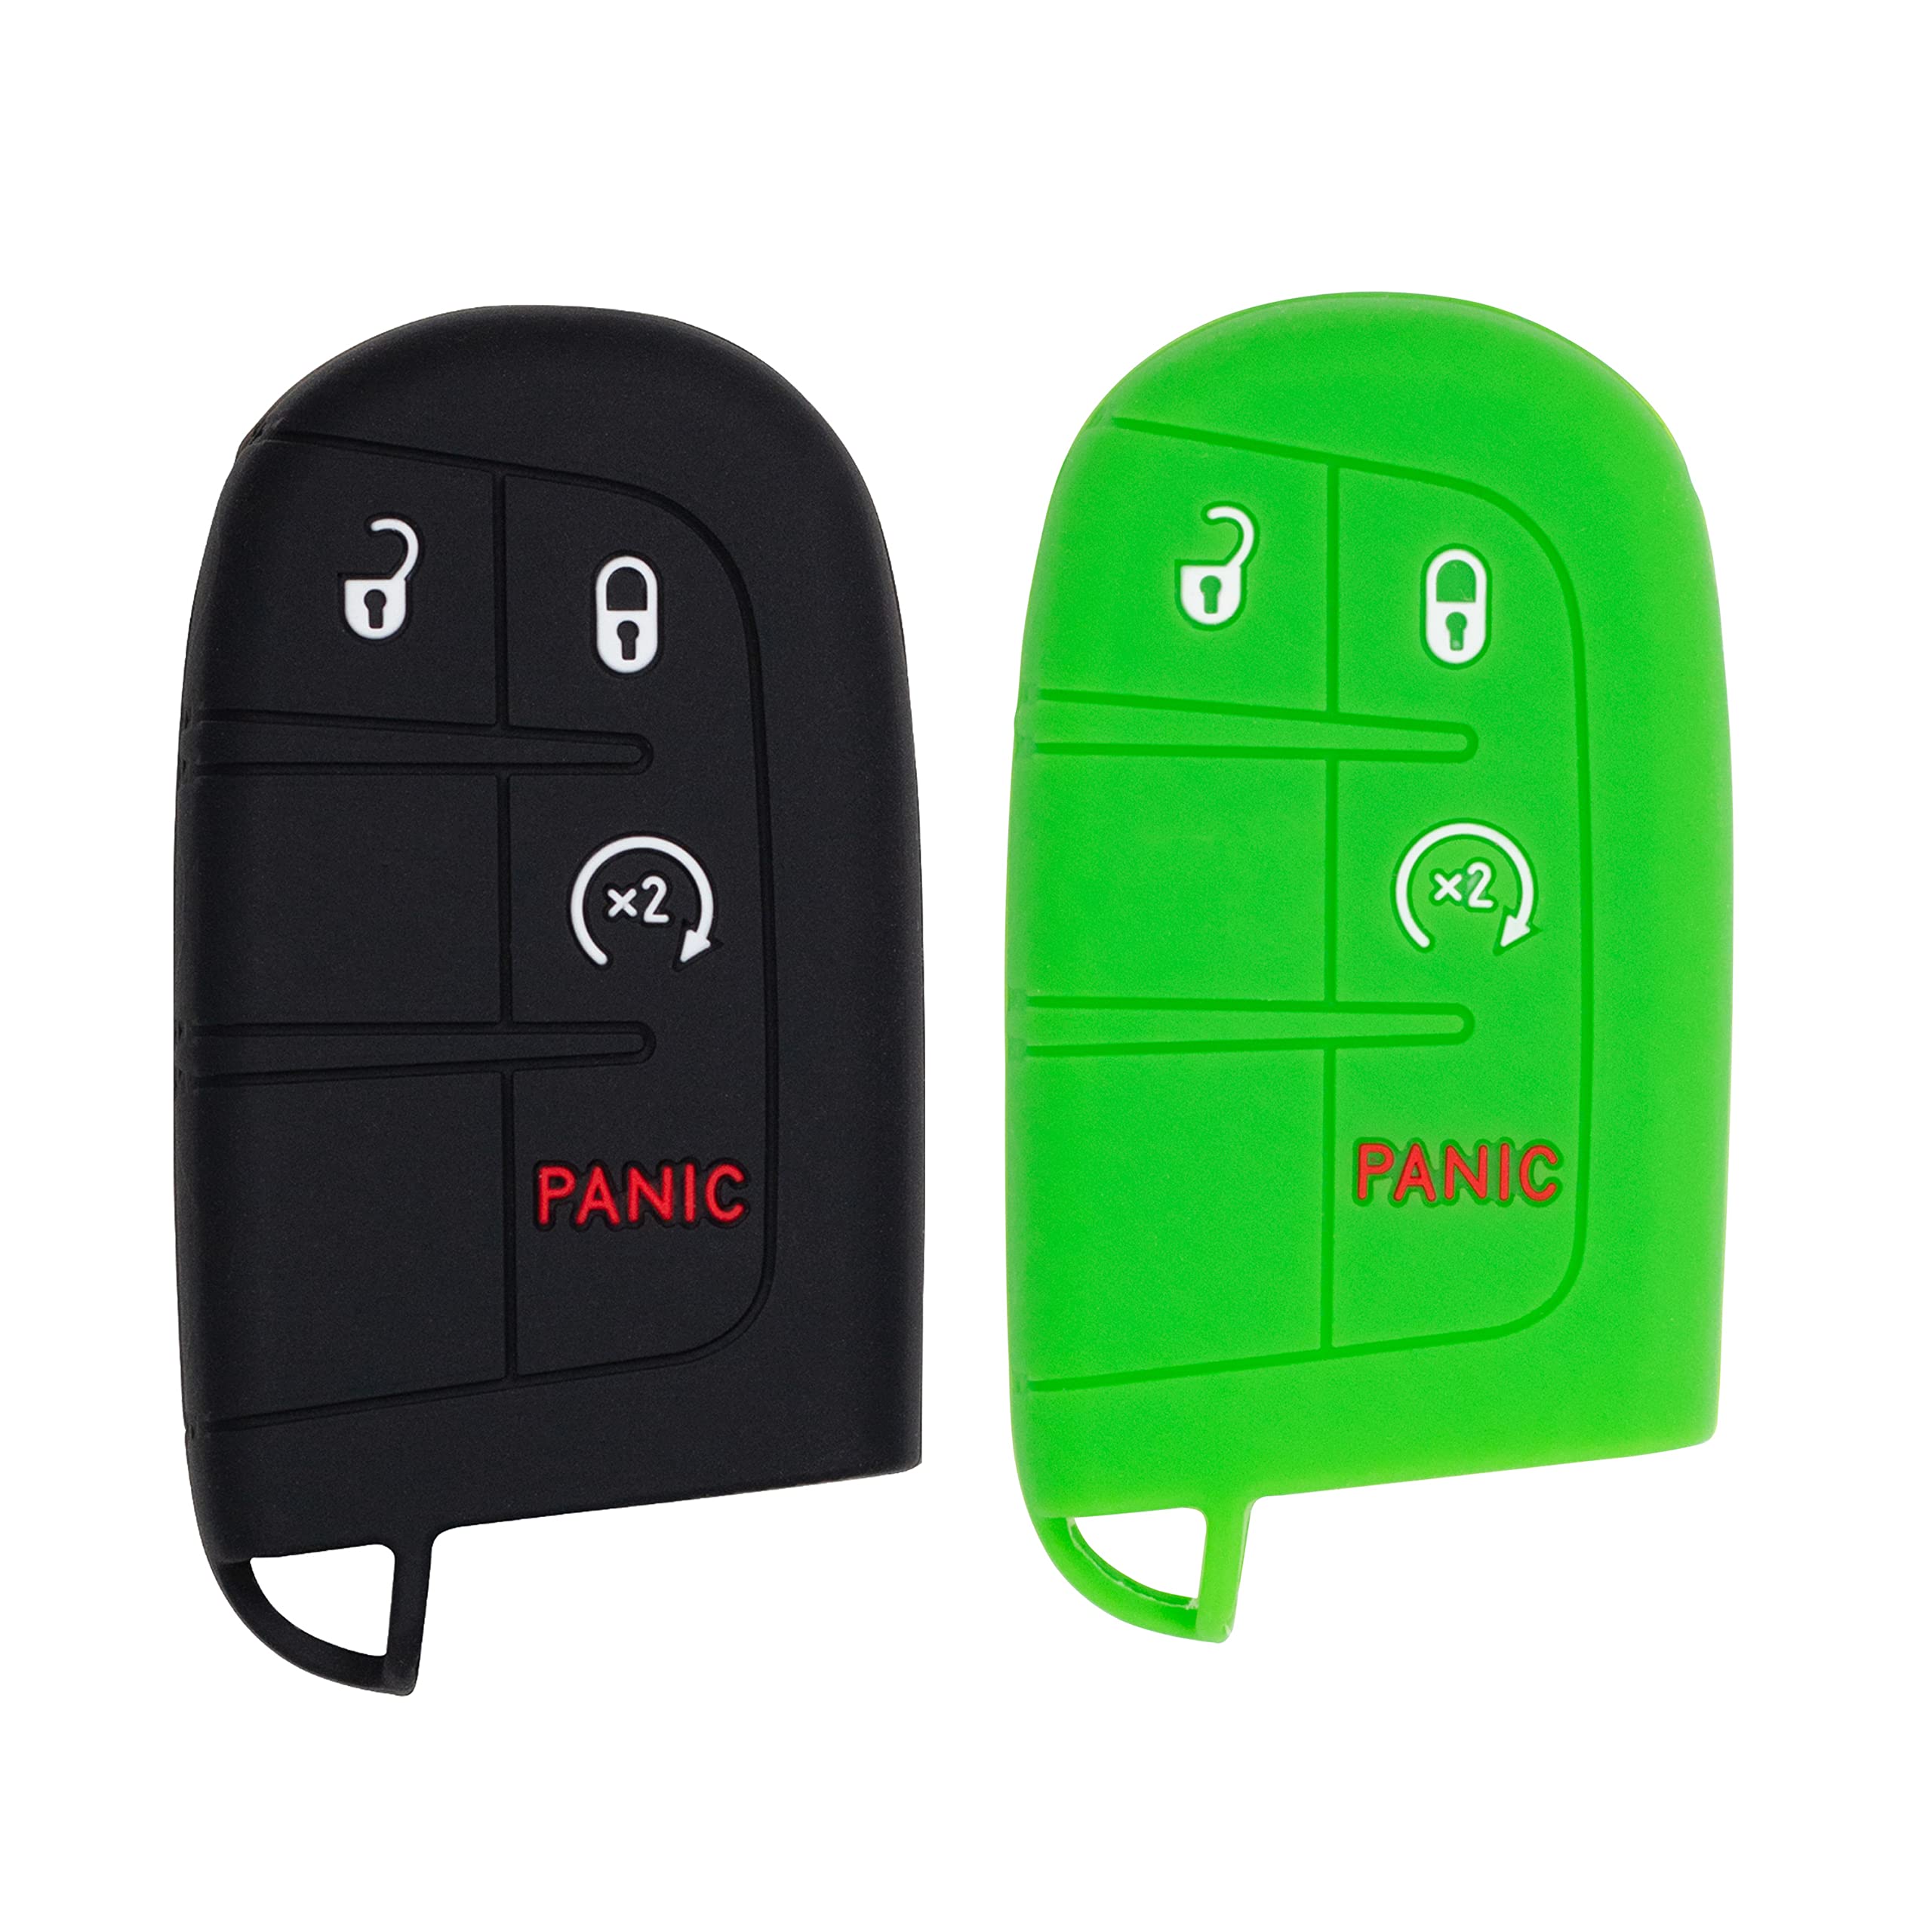 Silicone Case for Keyless entry Smart key fob for Jeep Renegade Grand Cherokee Compass Journey Durango Charger 300 200 Cherokee (Double, Black & Green)